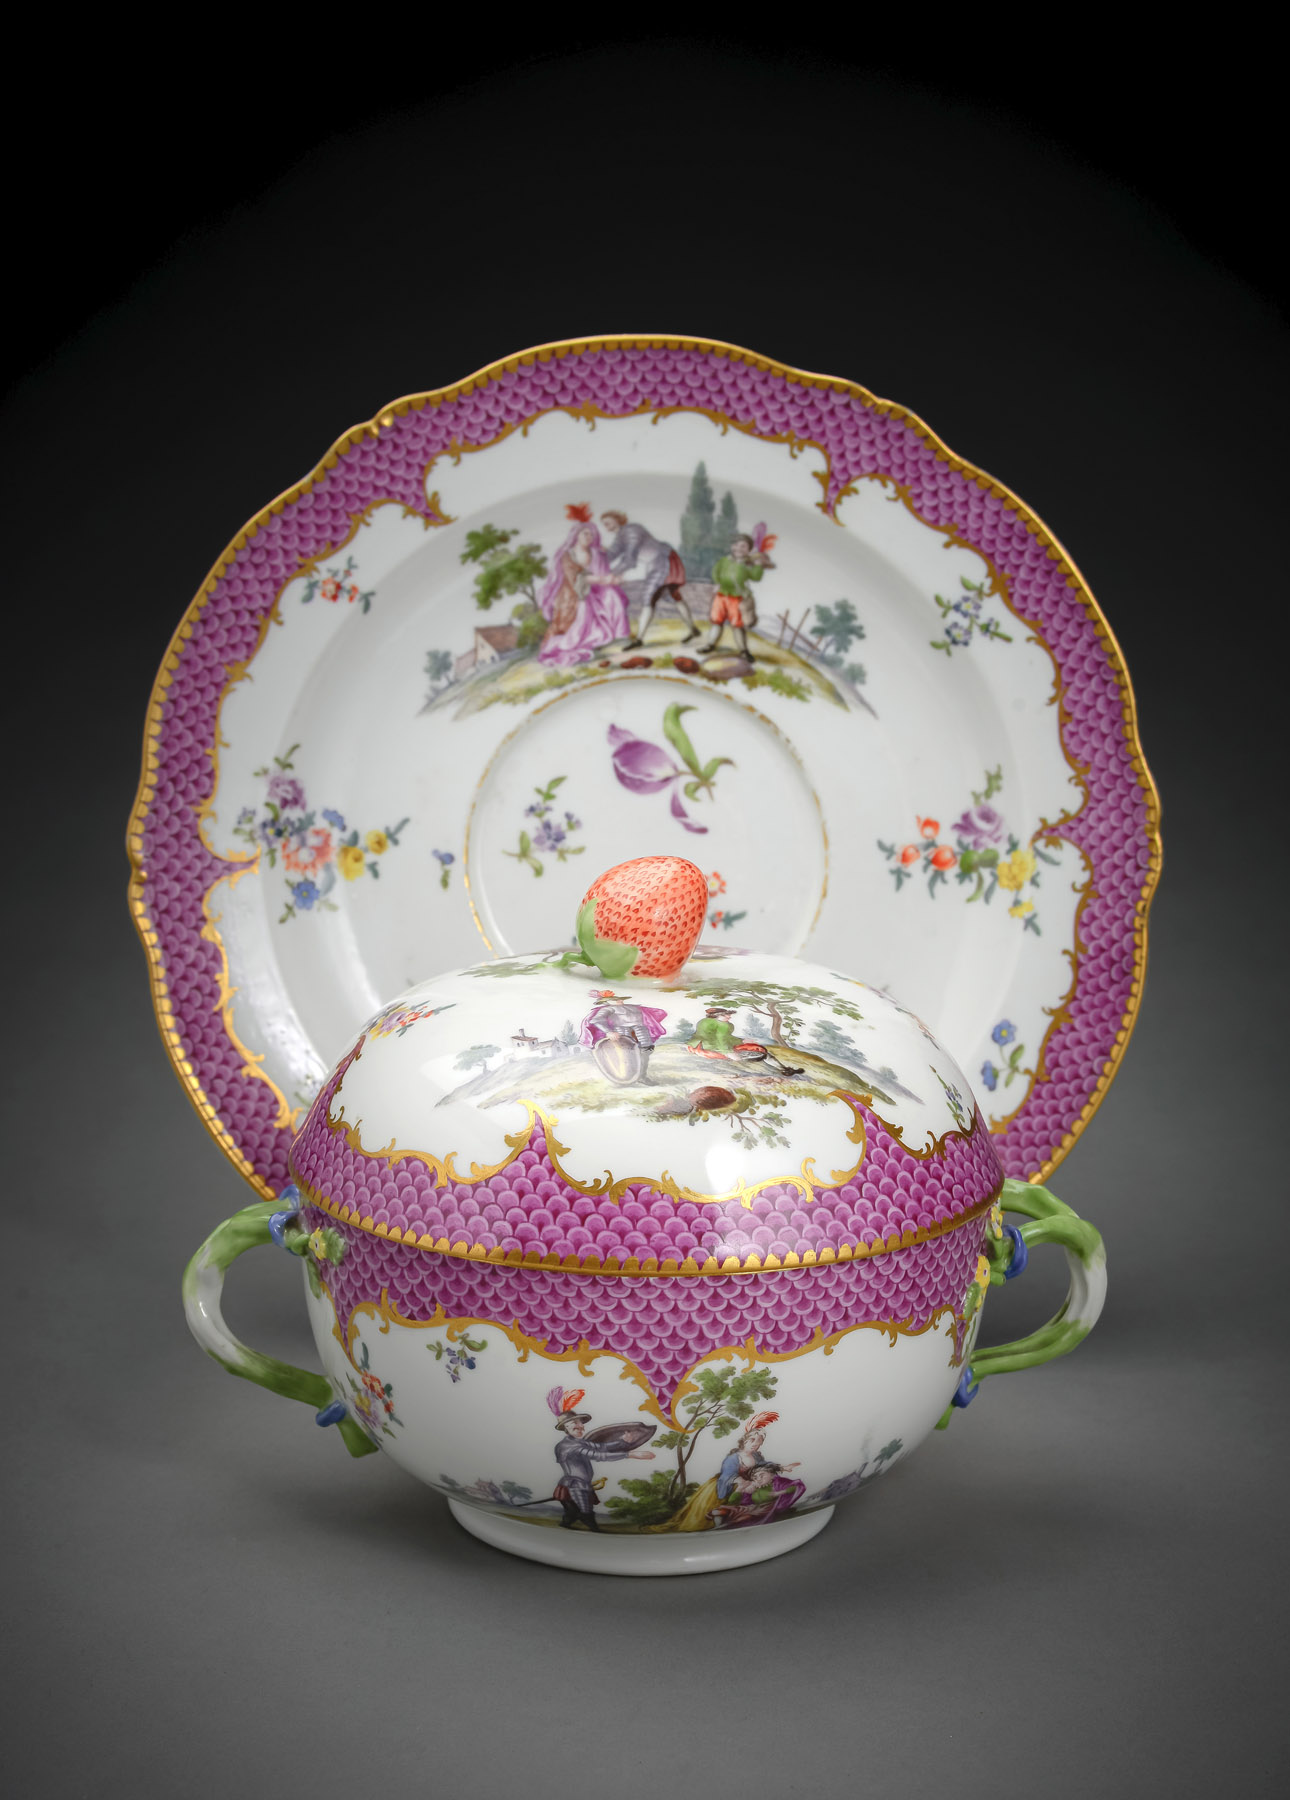 A FINE MEISSEN PORCELAIN ECUELLE WITH COVER AND DISH - Image 3 of 4